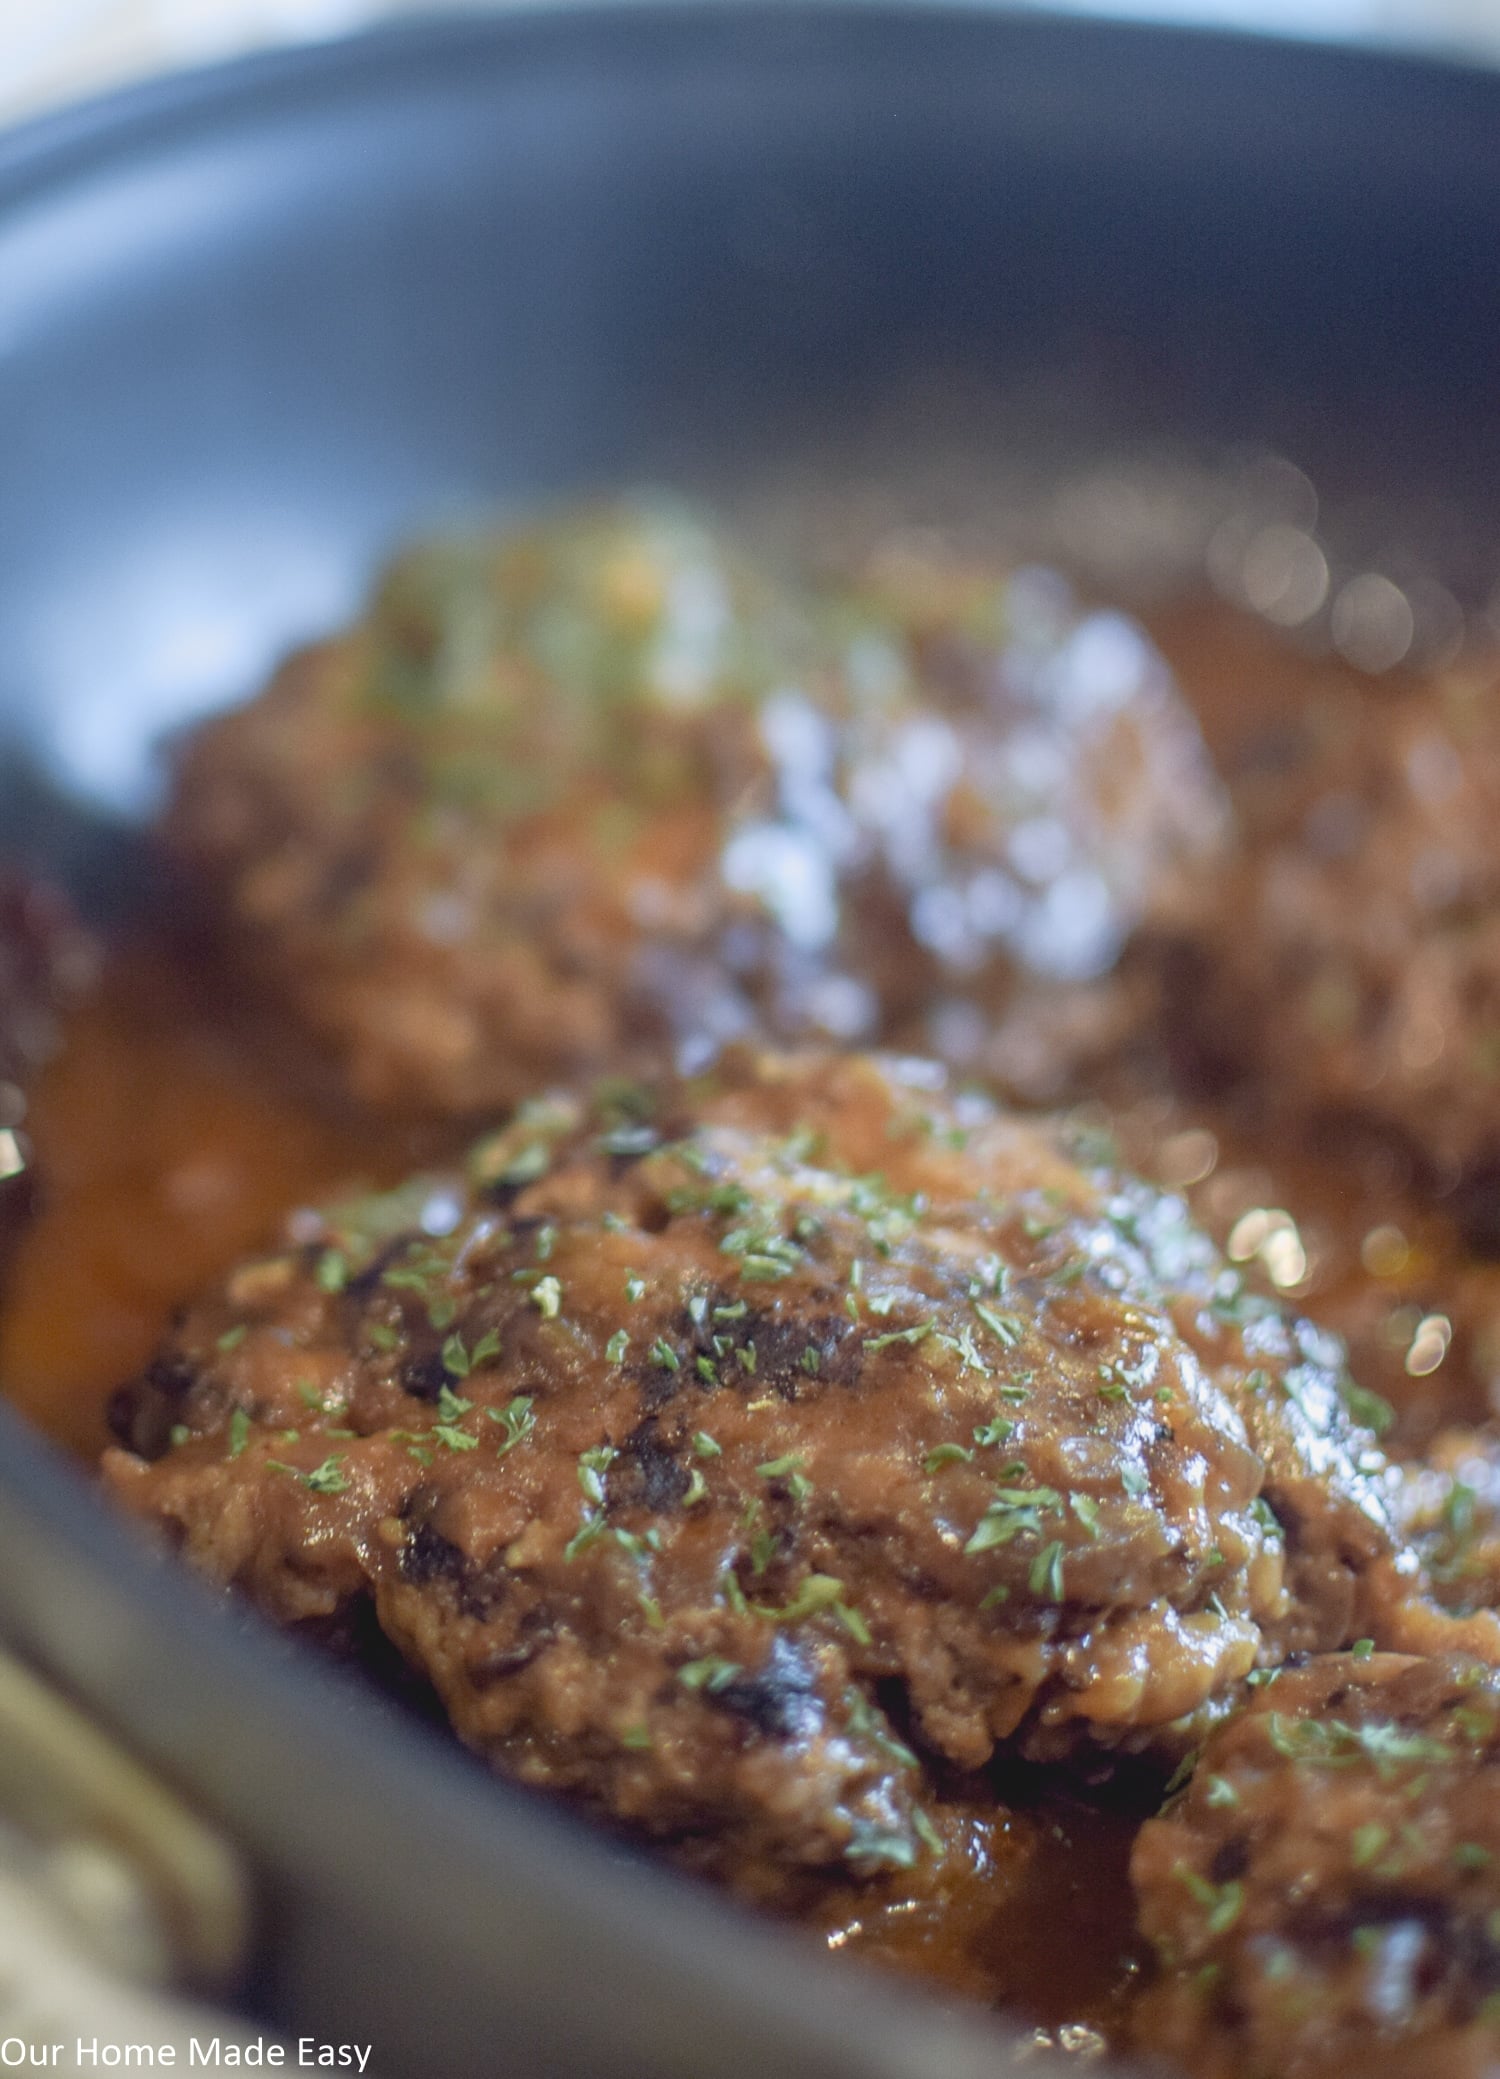 If you're looking for the best Salsbury Steak recipe, you've got to try this easy recipe!